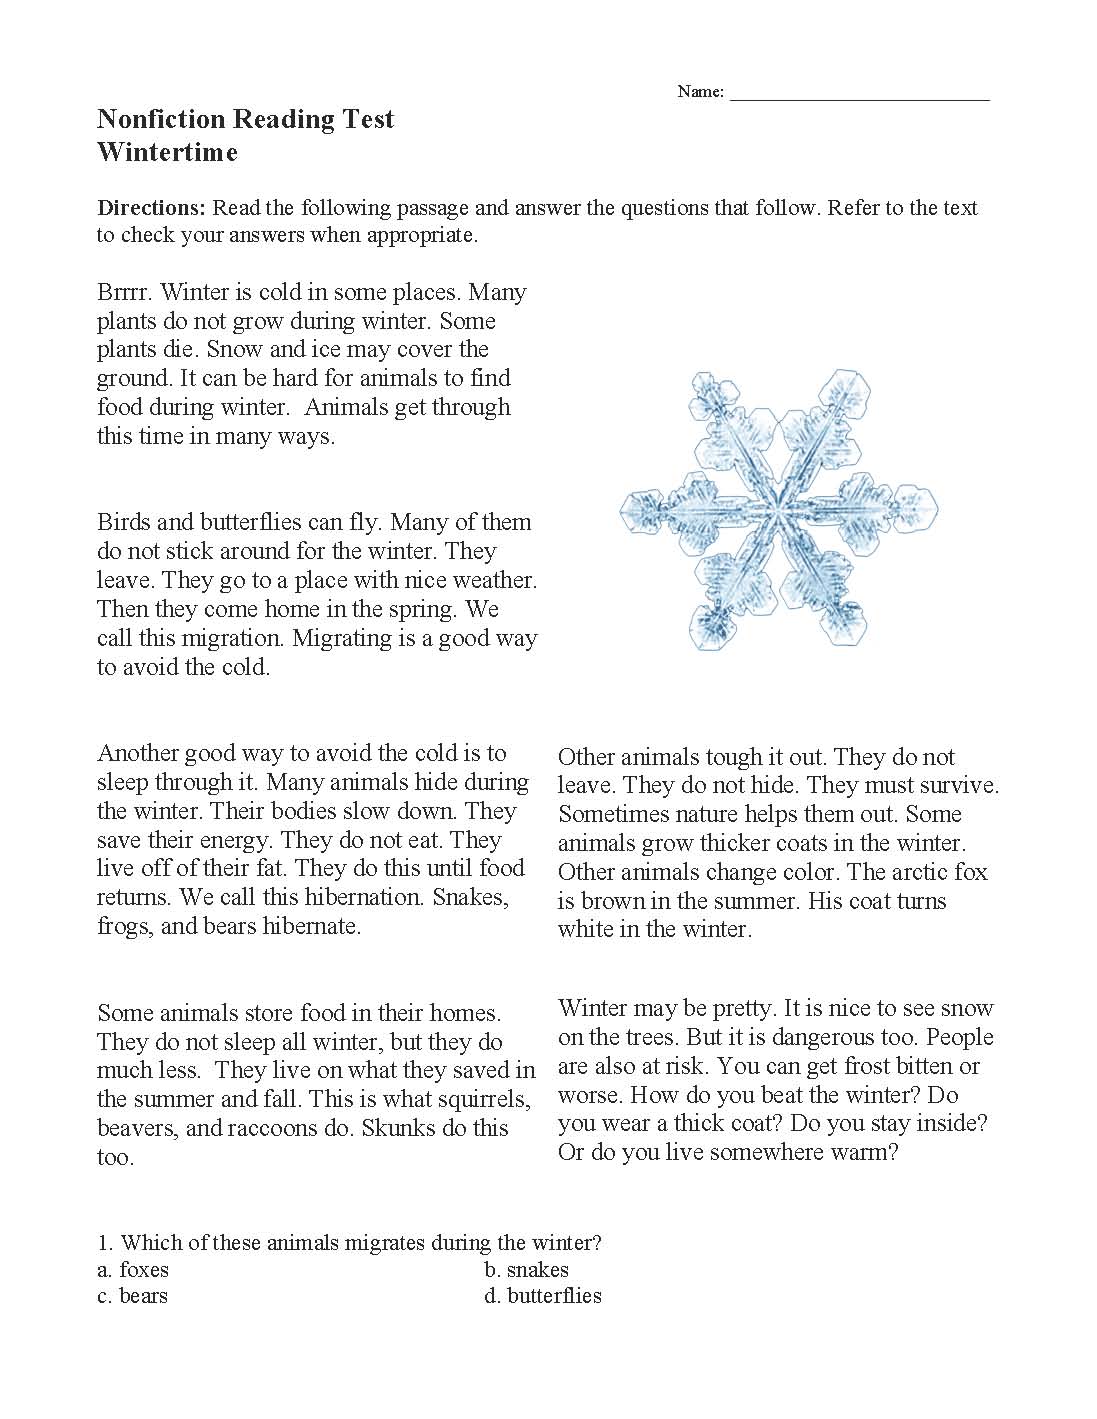 This is a preview image of Wintertime. Click on it to enlarge it or view the source file.